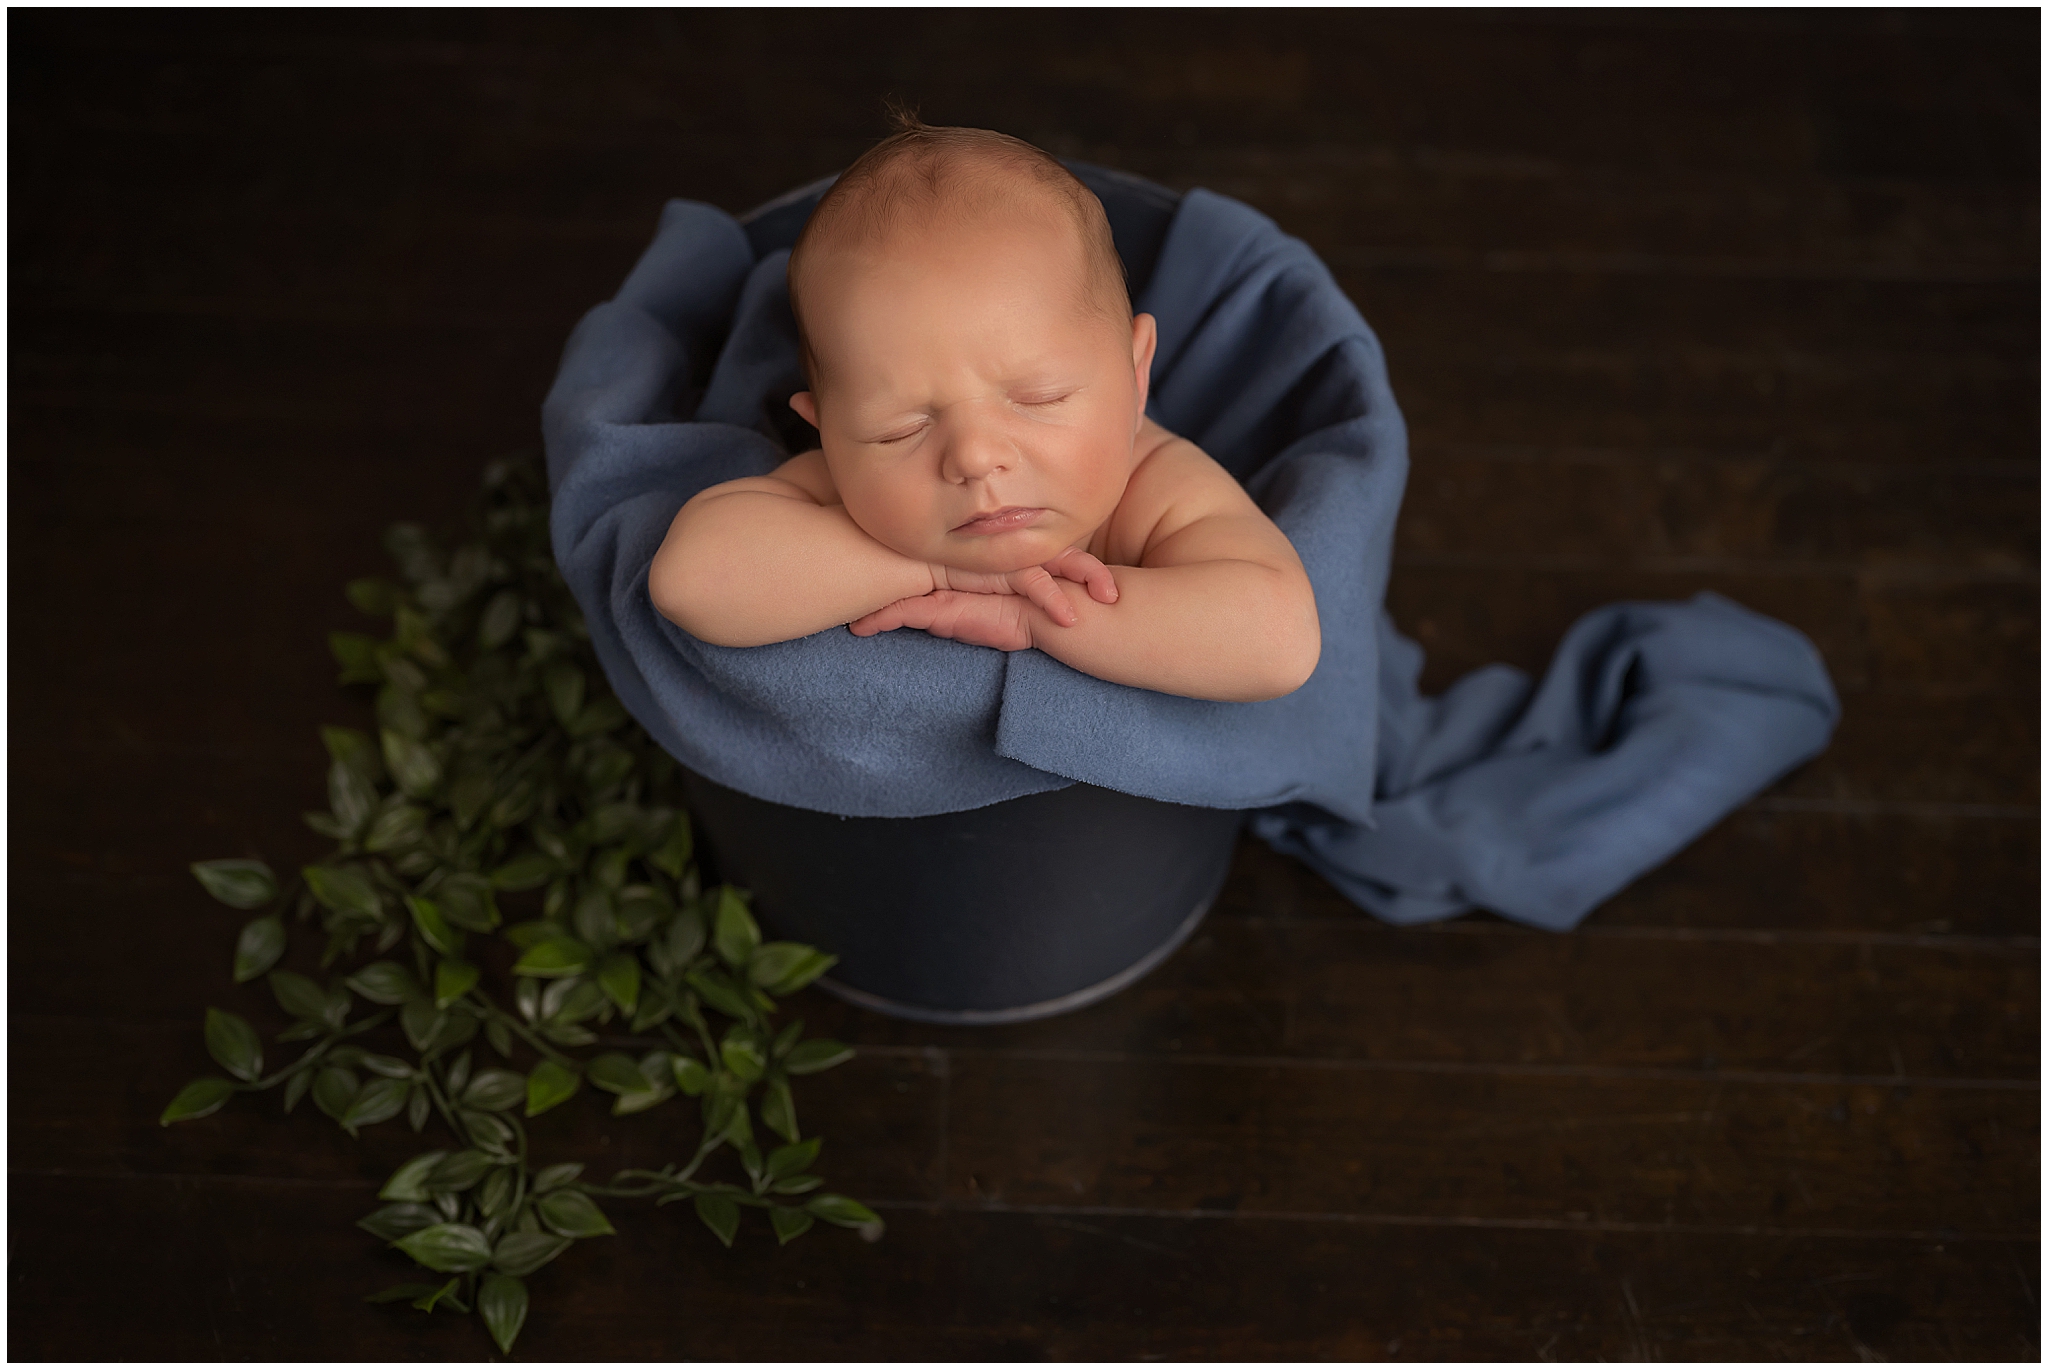 baby boy in bucket during newborn photography session in london ontario